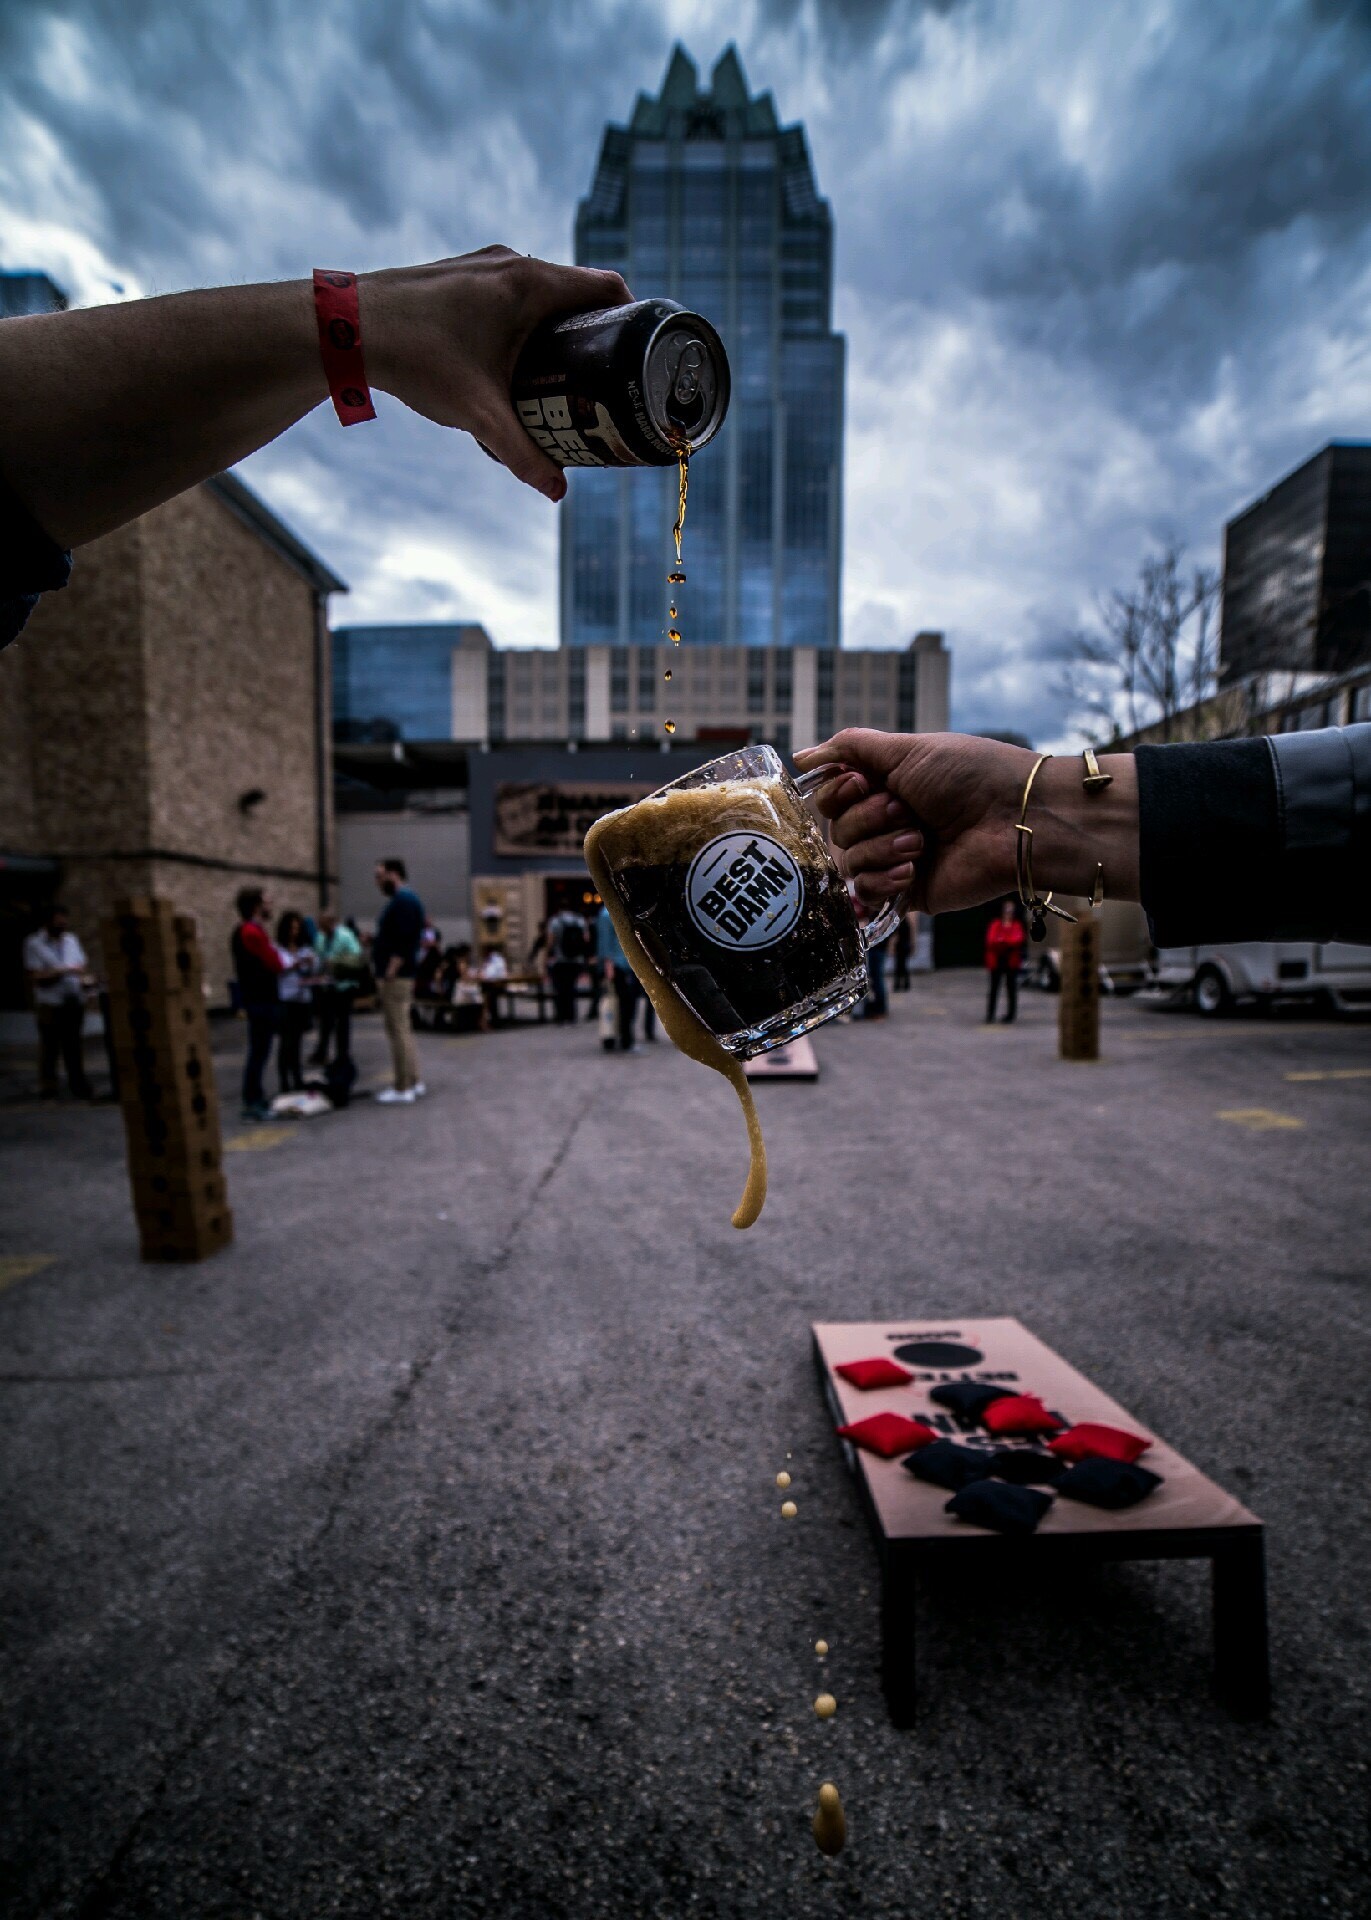 Best Damn Brewing Co. Debuts Best Damn Beer Gear Designed To Take The Beer-Drinking Experience To The Next Level At SXSW Interactive Festival